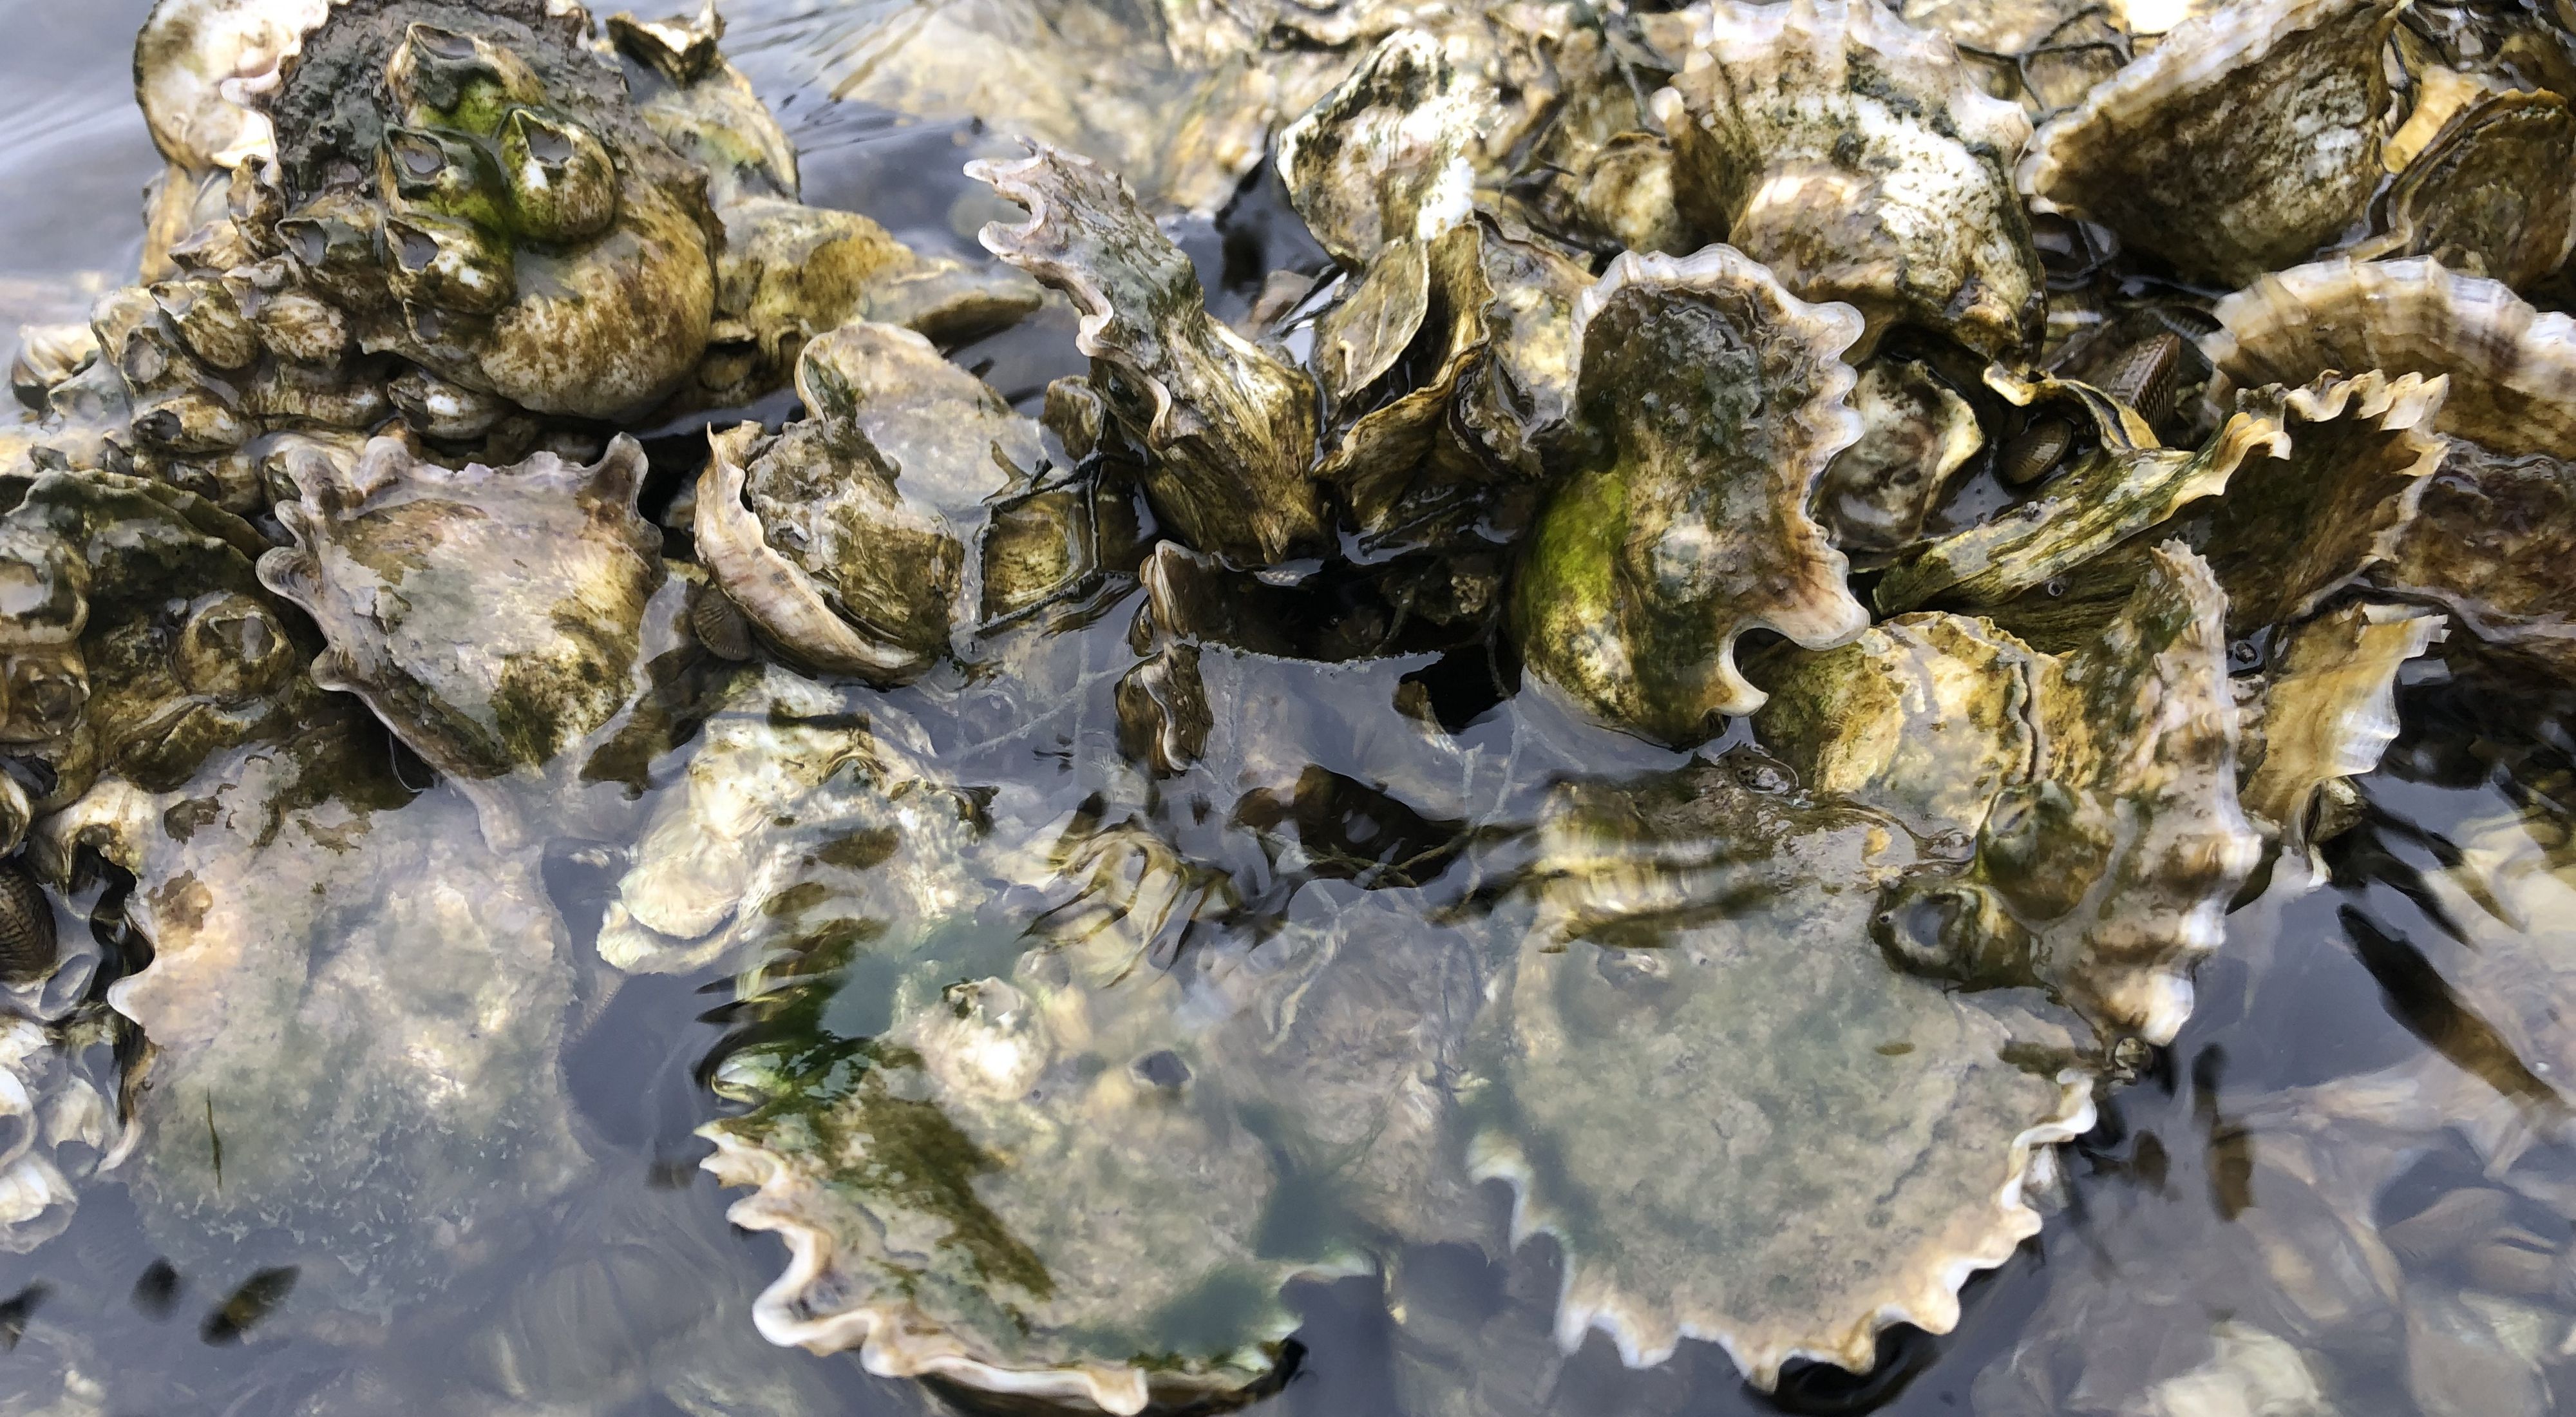 Oysters clustered together in a reef sit just below the water.